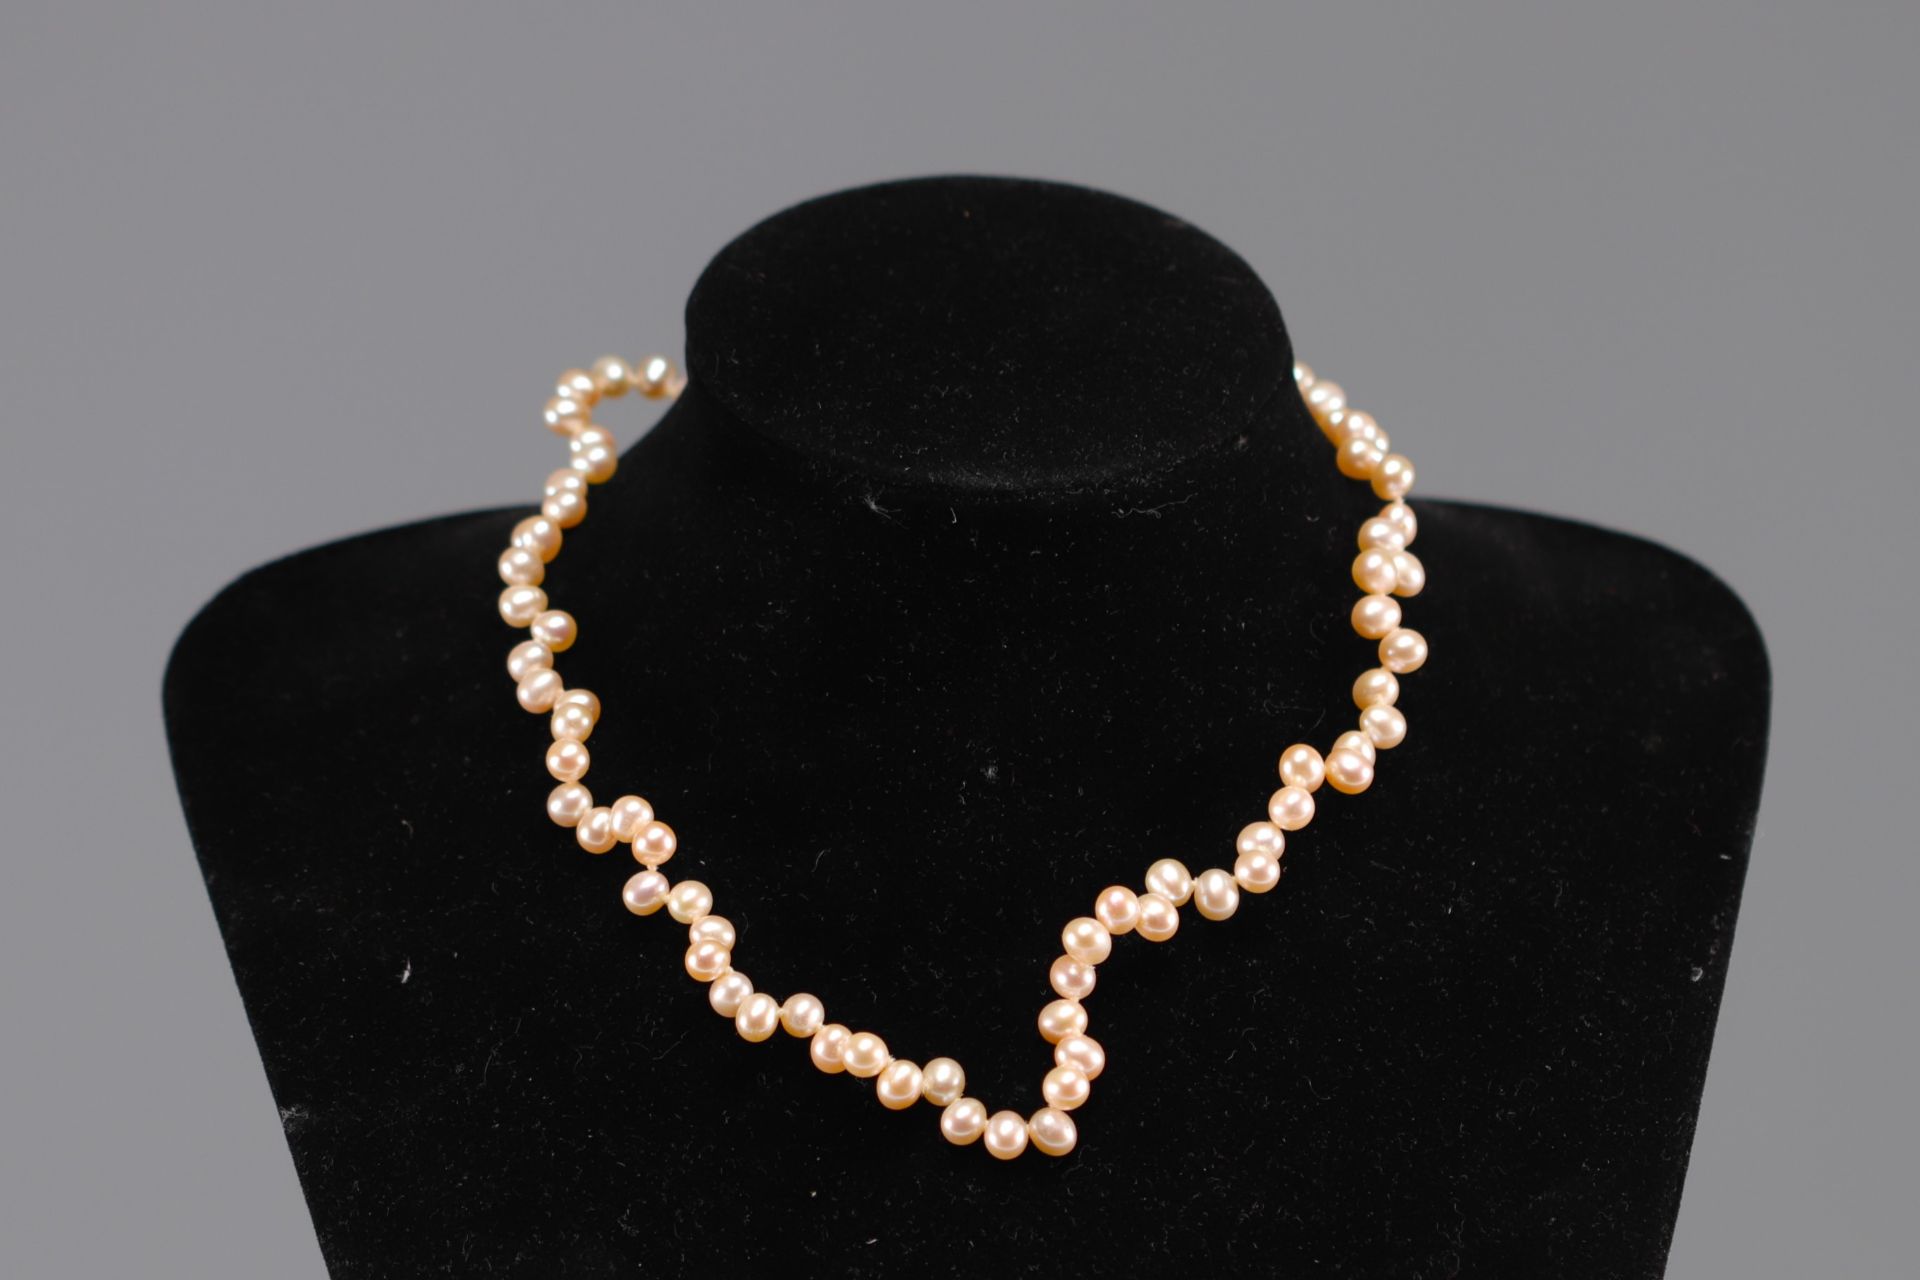 Pink pearl necklace with a clasp made of 18k gold.